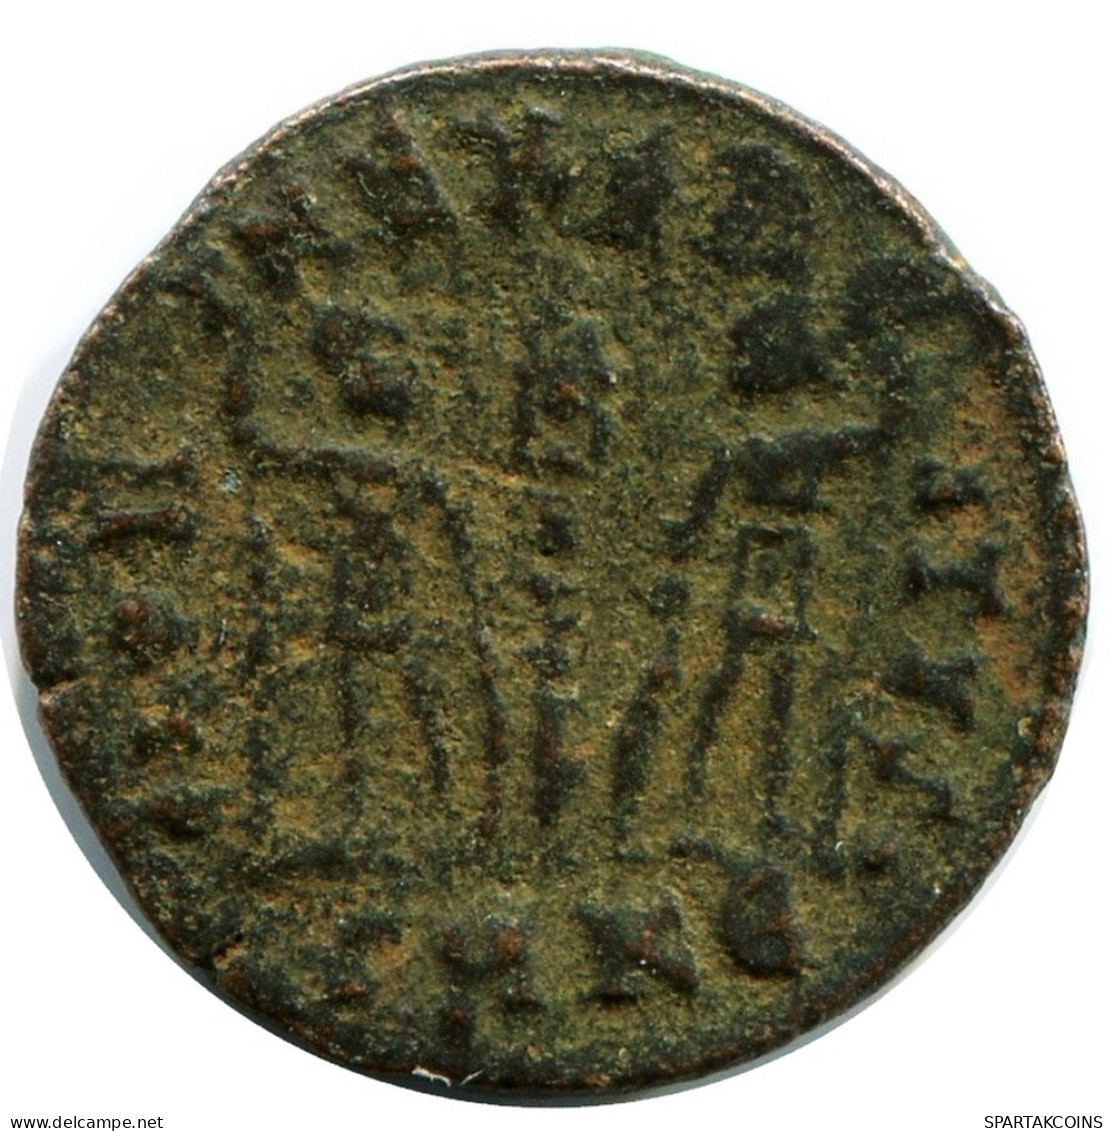 CONSTANS MINTED IN CYZICUS FROM THE ROYAL ONTARIO MUSEUM #ANC11684.14.E.A - L'Empire Chrétien (307 à 363)